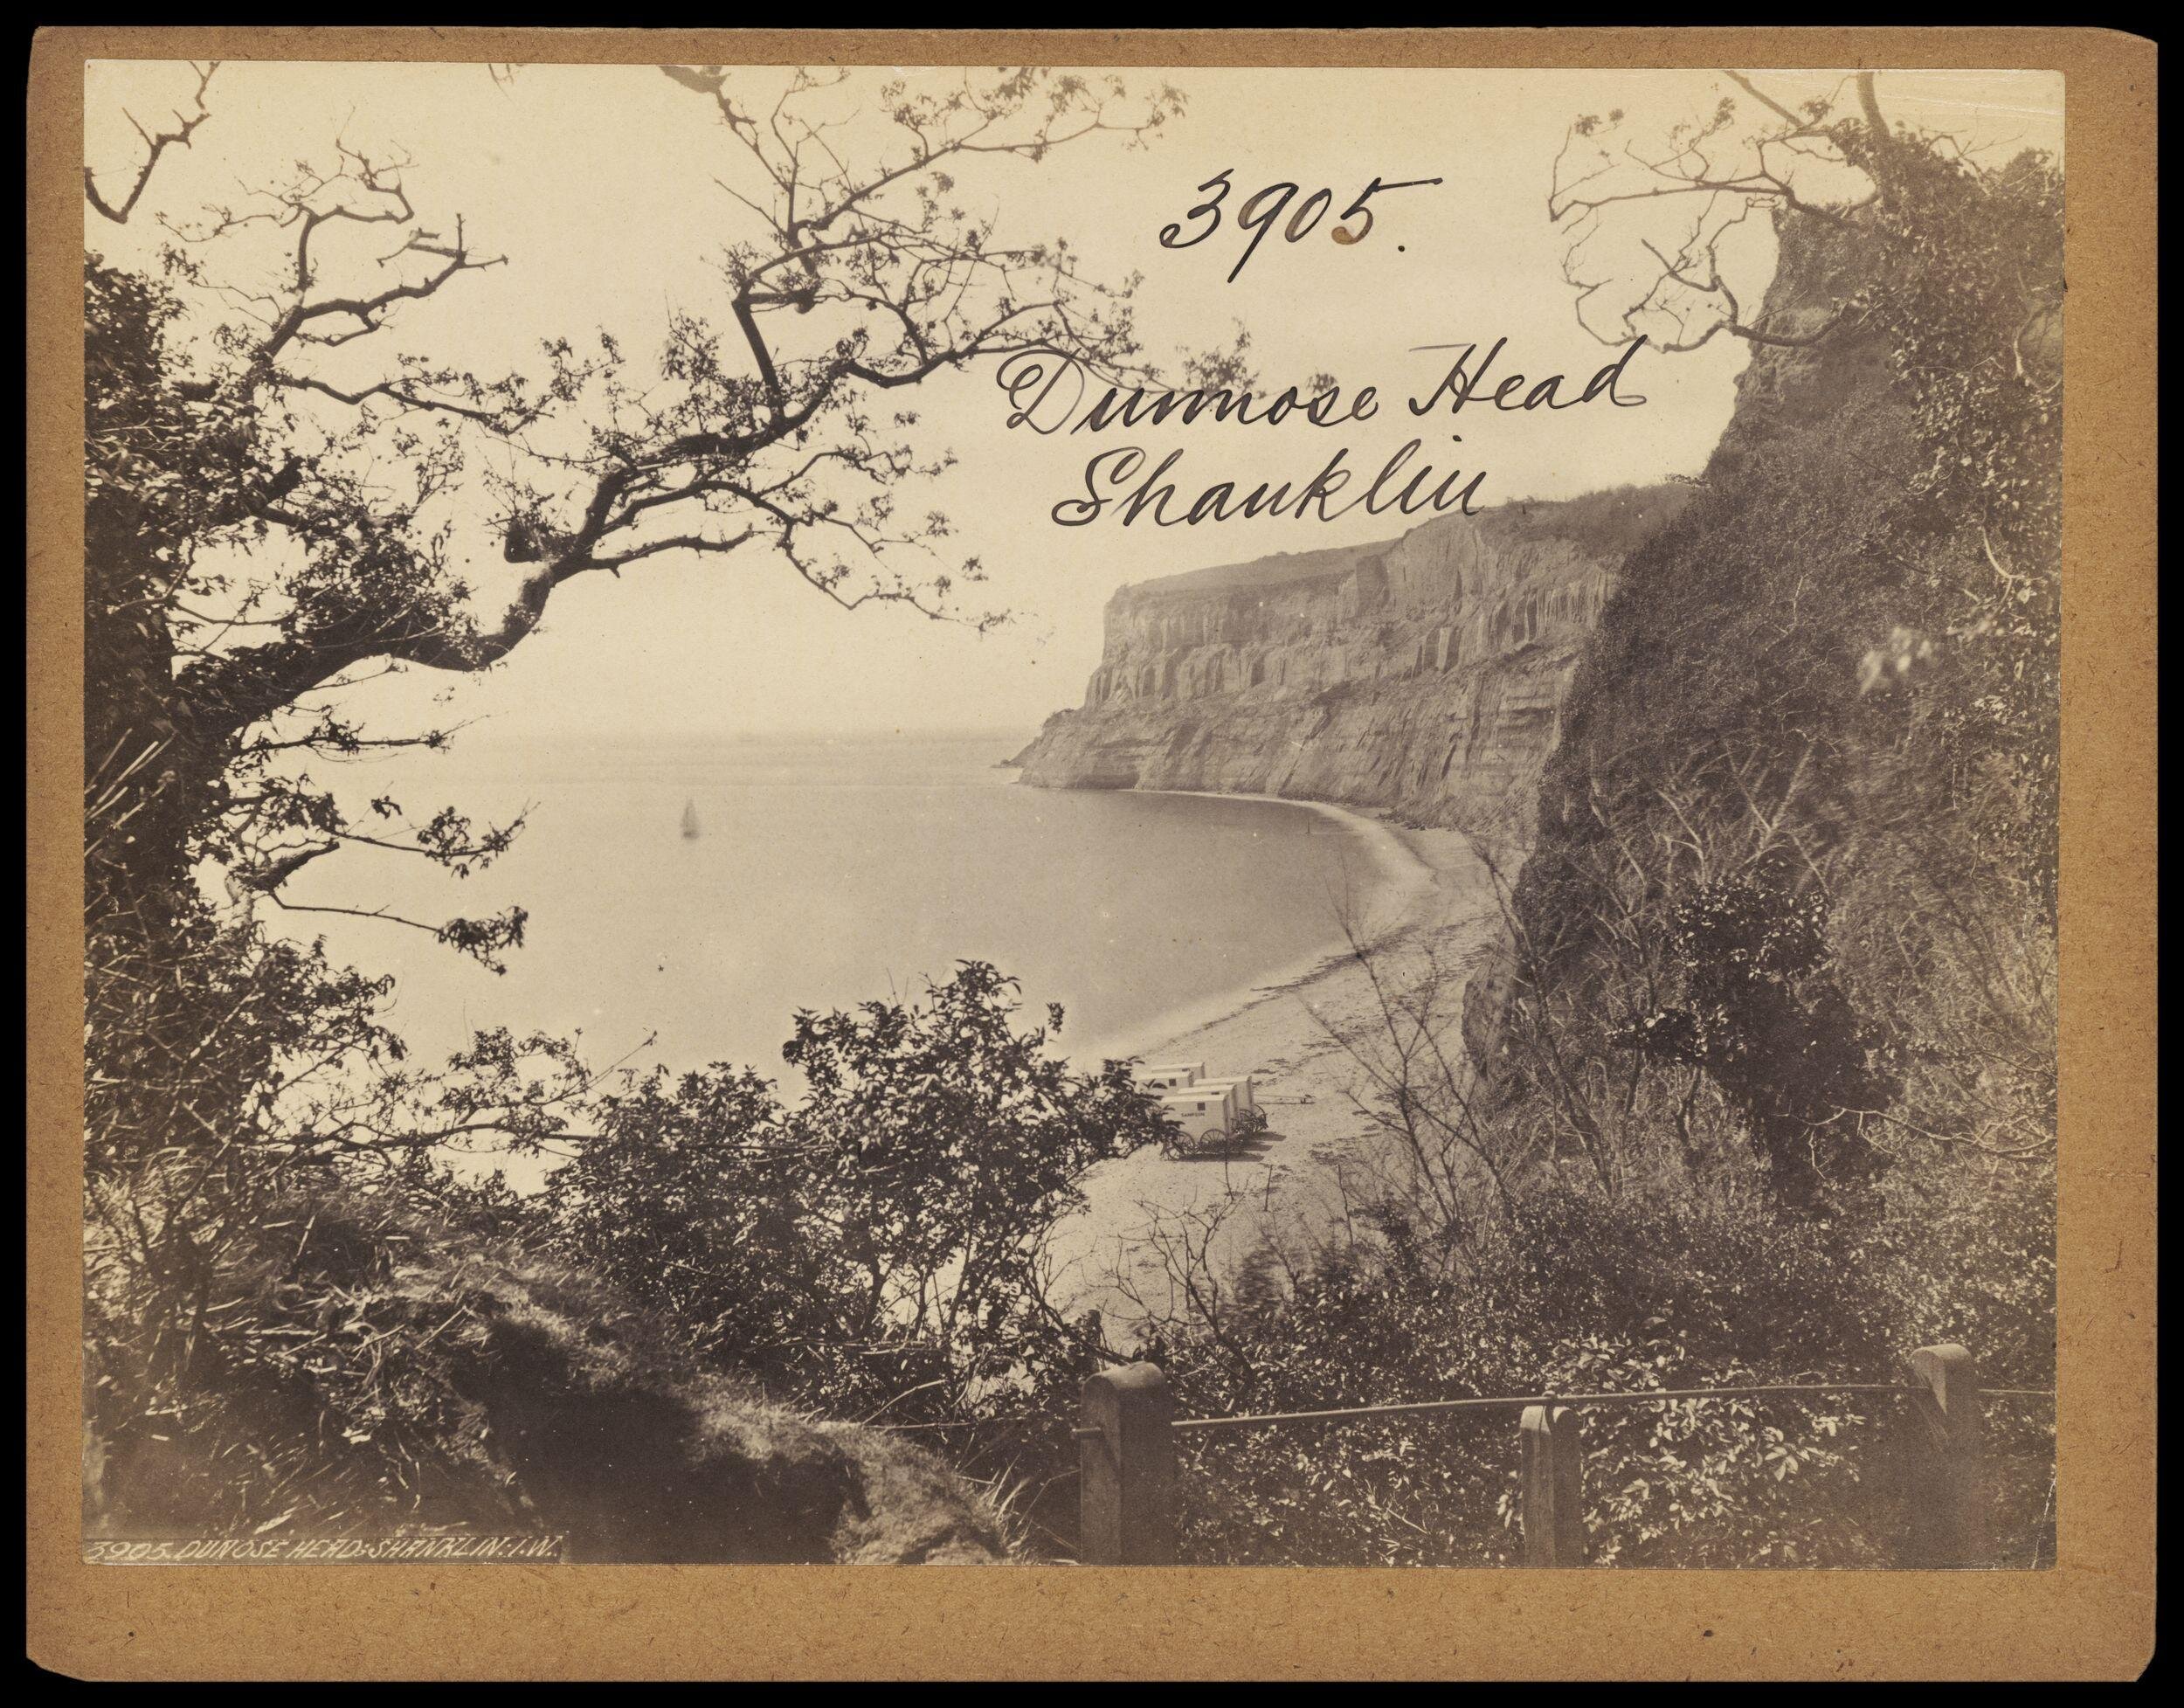 Photograph by Francis Frith; Dunnose Head, Shanklin c.1860 (Victoria and Albert
        Museum E.208:3187-1994). Click to enlarge.